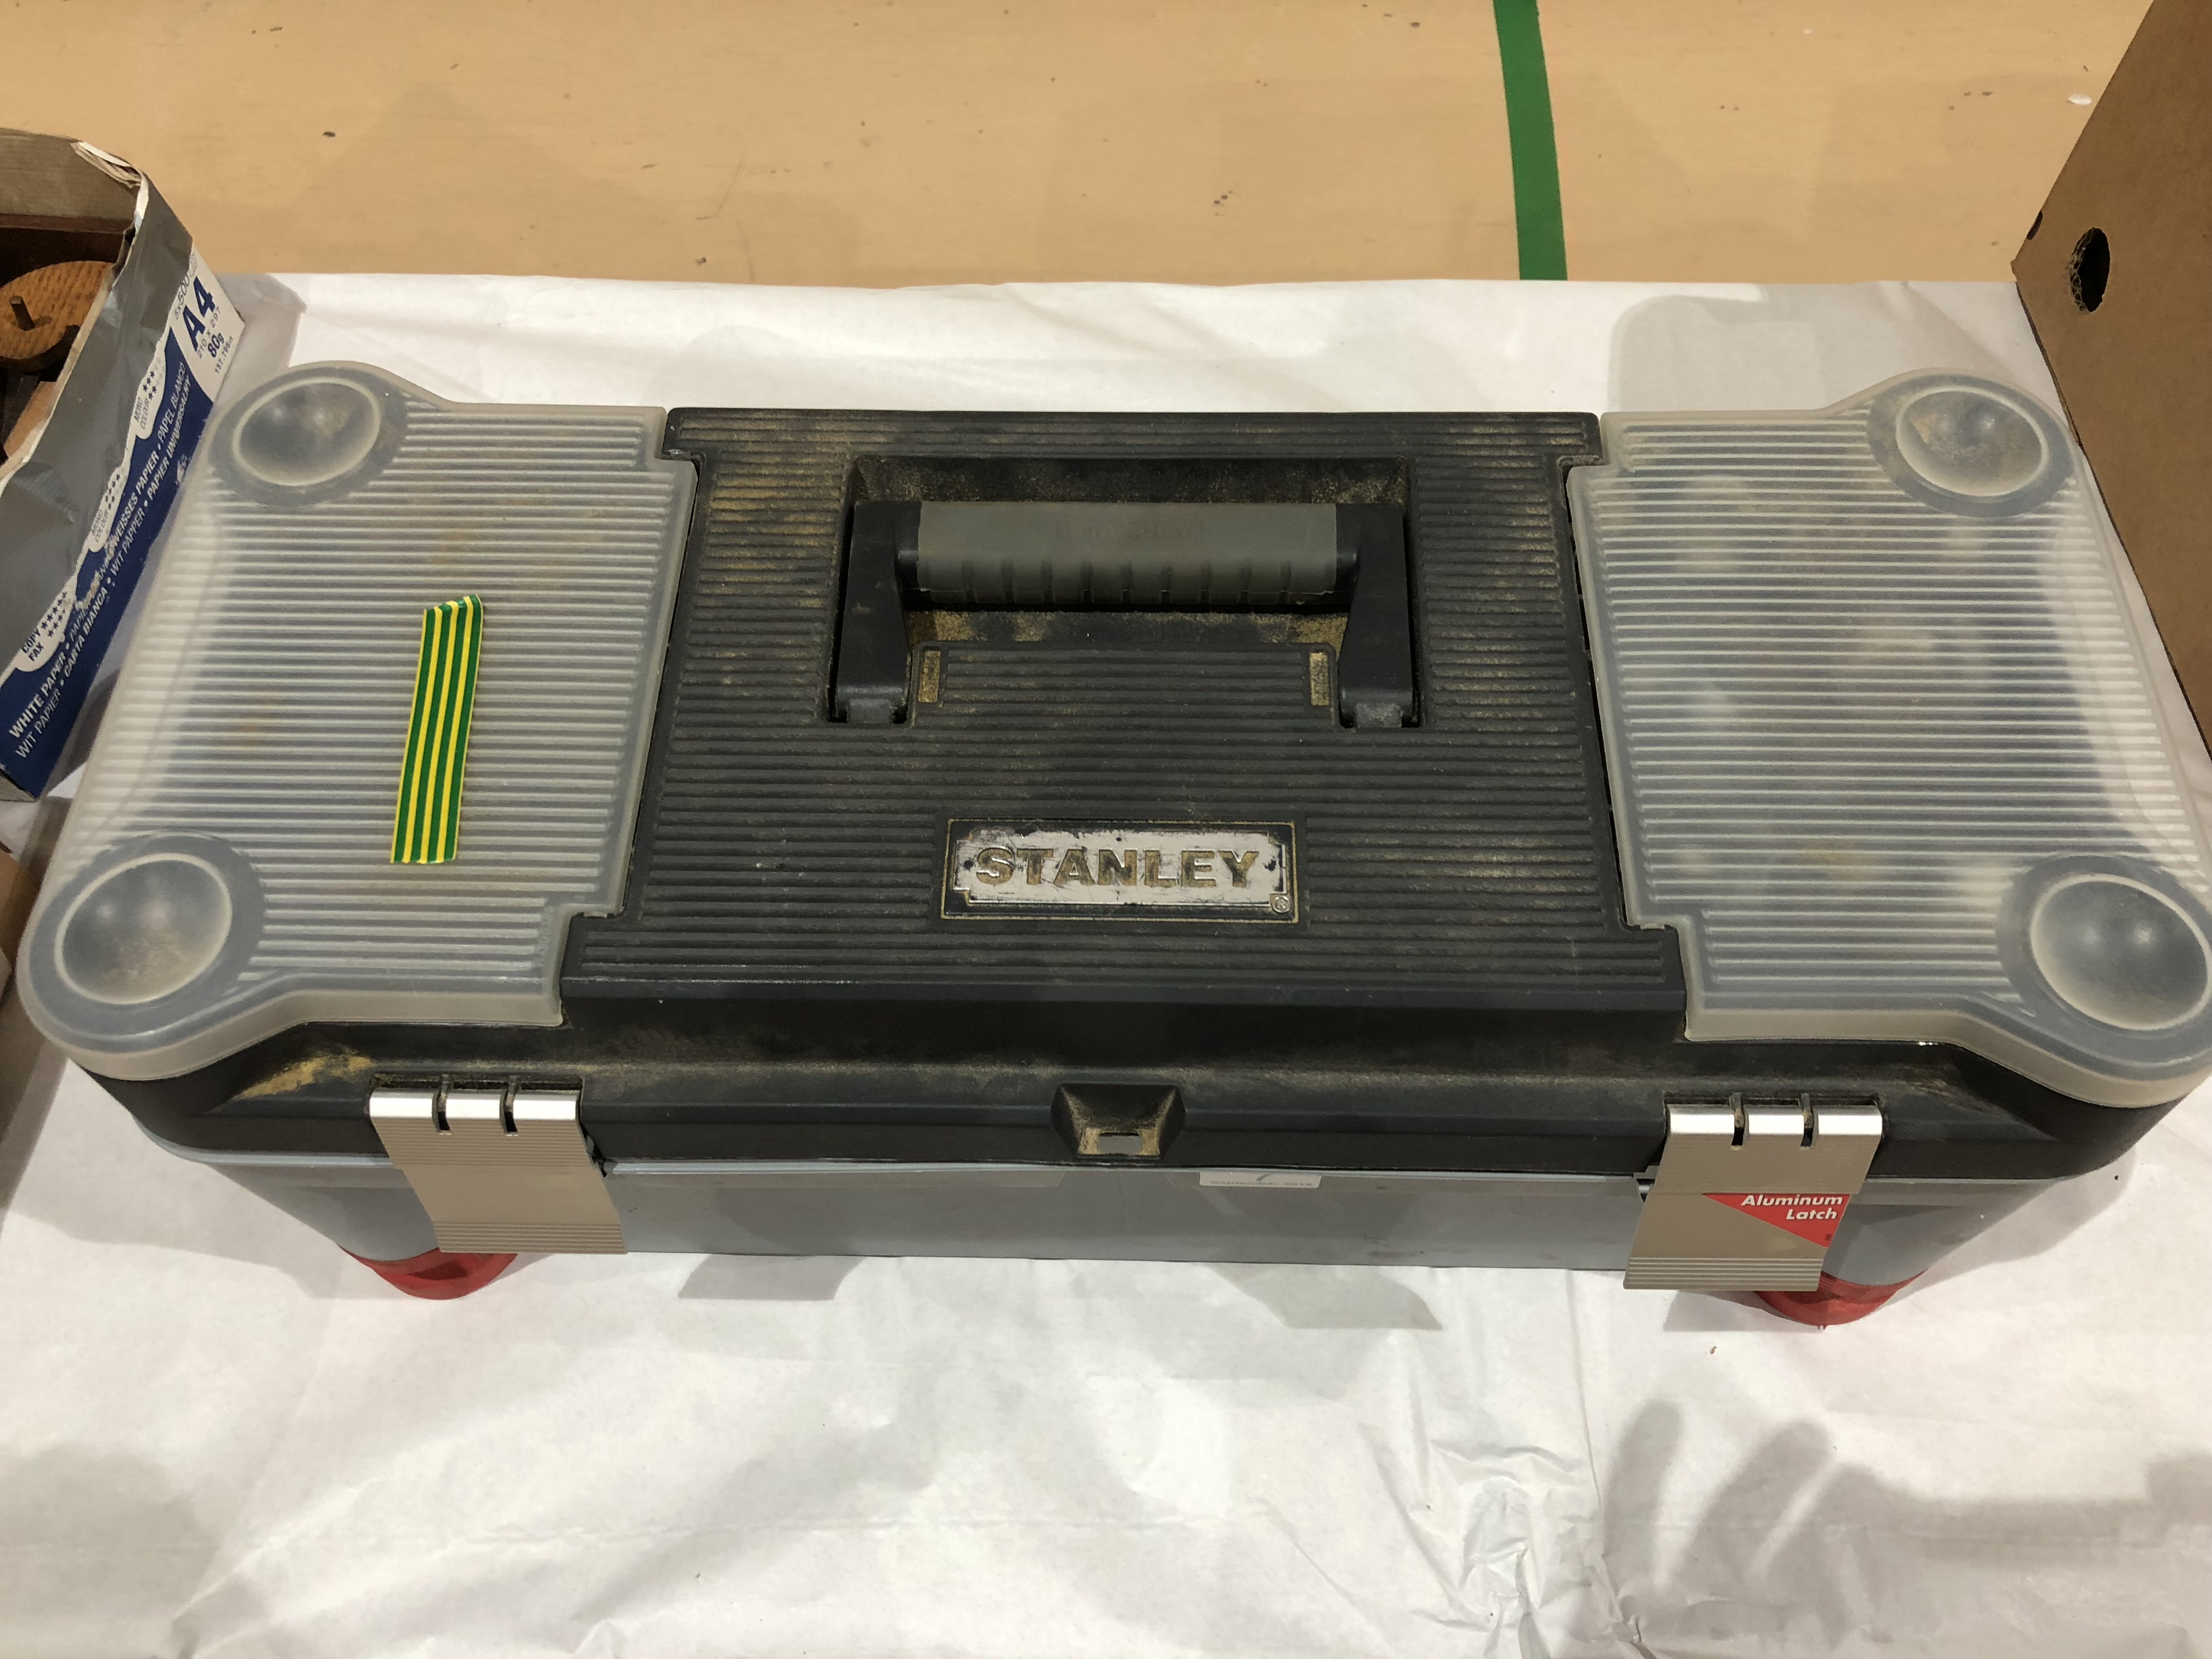 A STANLEY tools box with plumbers tools G